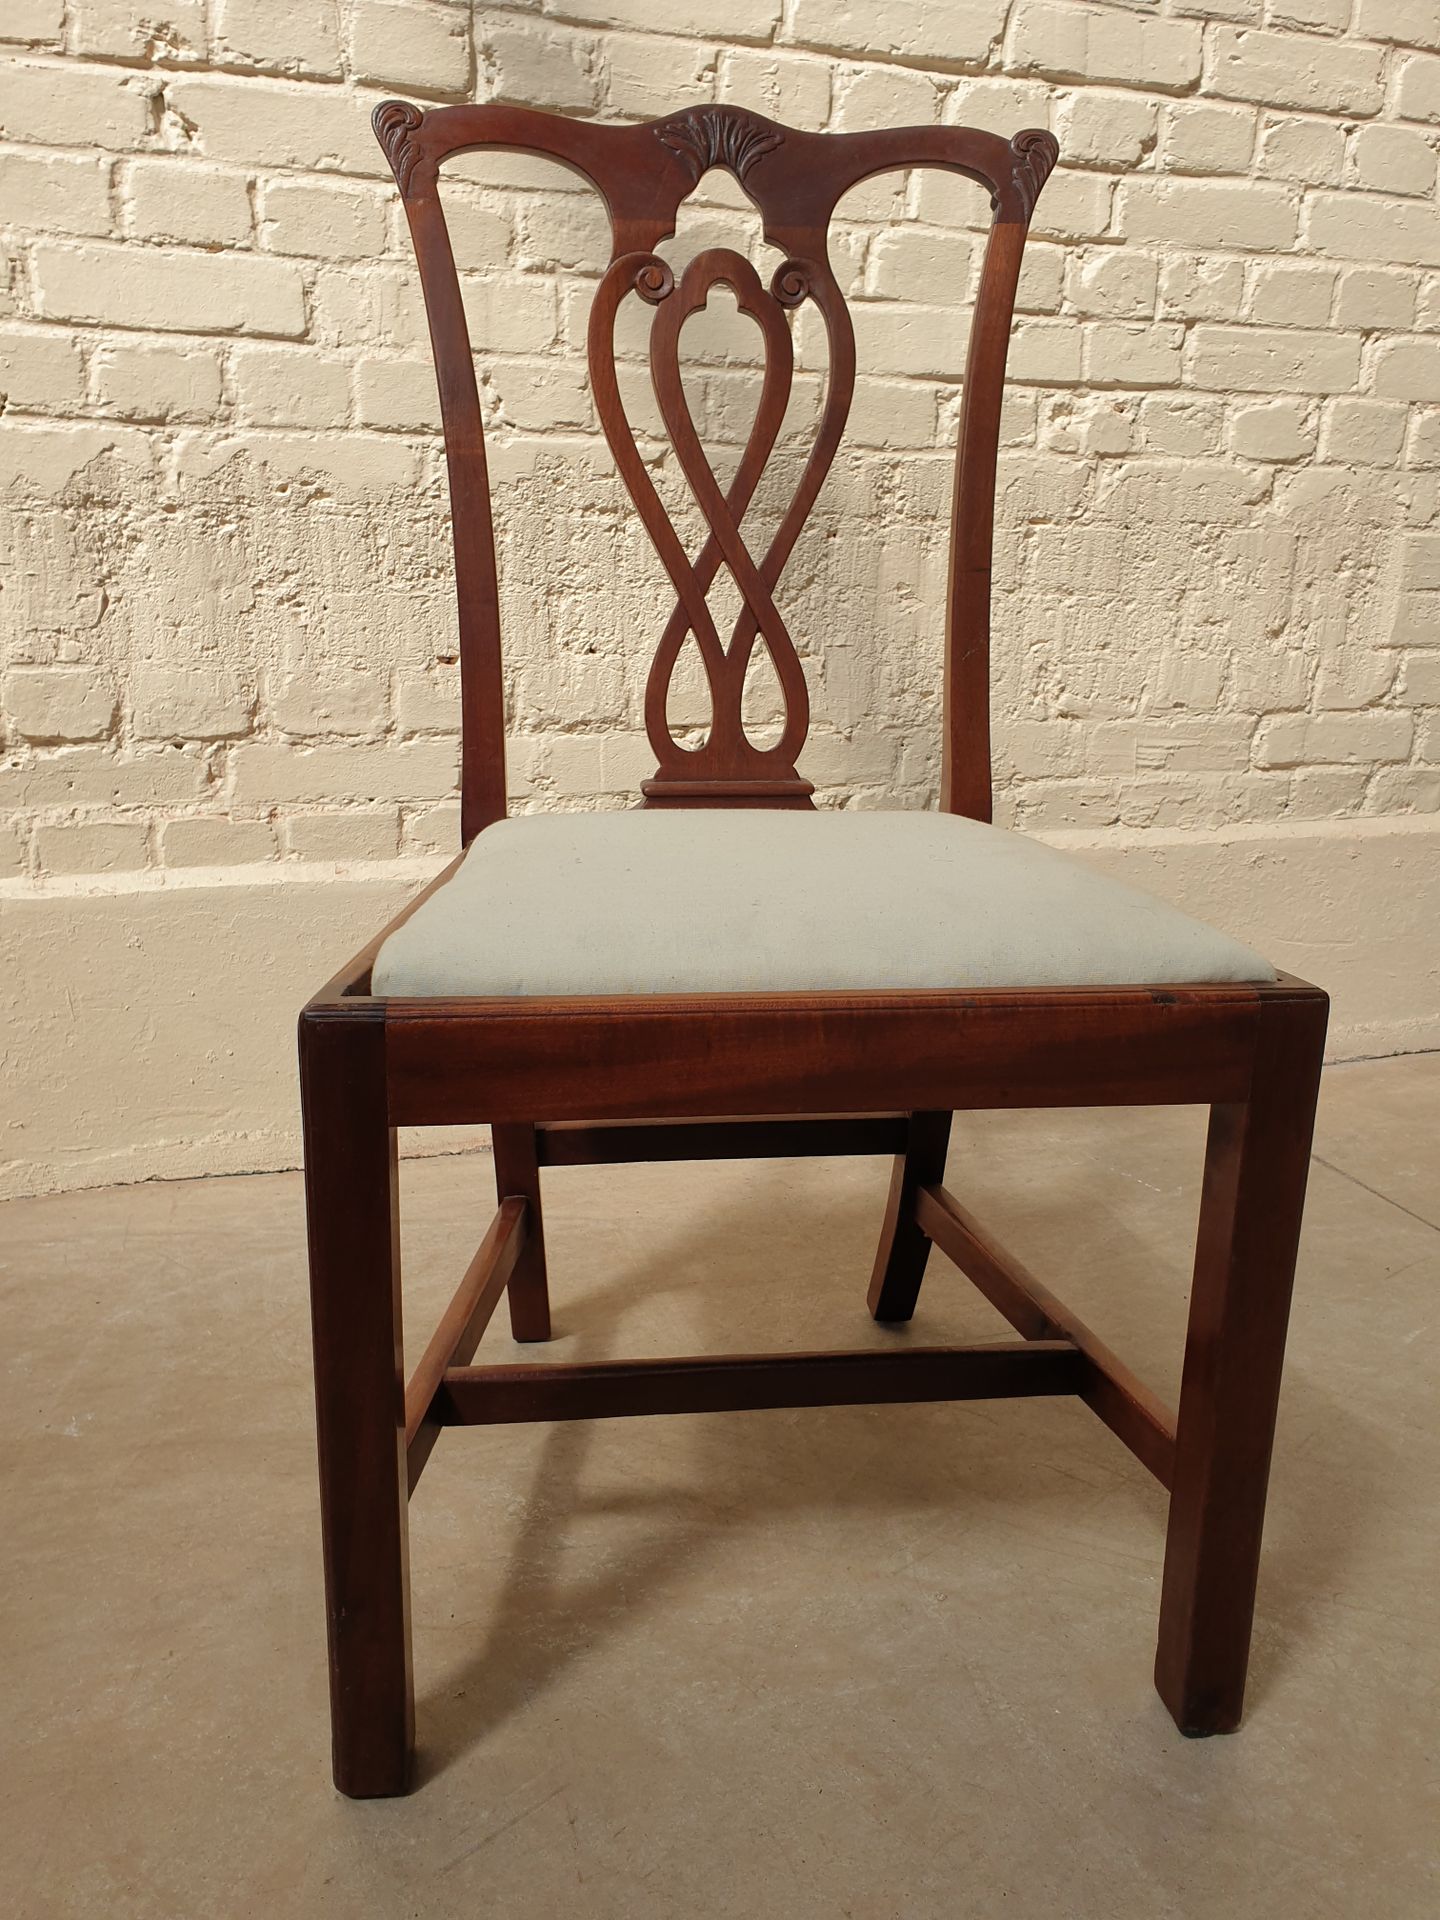 Null BEAUTIFUL SET OF EIGHT CHAIRS IN MOLDED MAHOGANY

Openwork back decorated w&hellip;